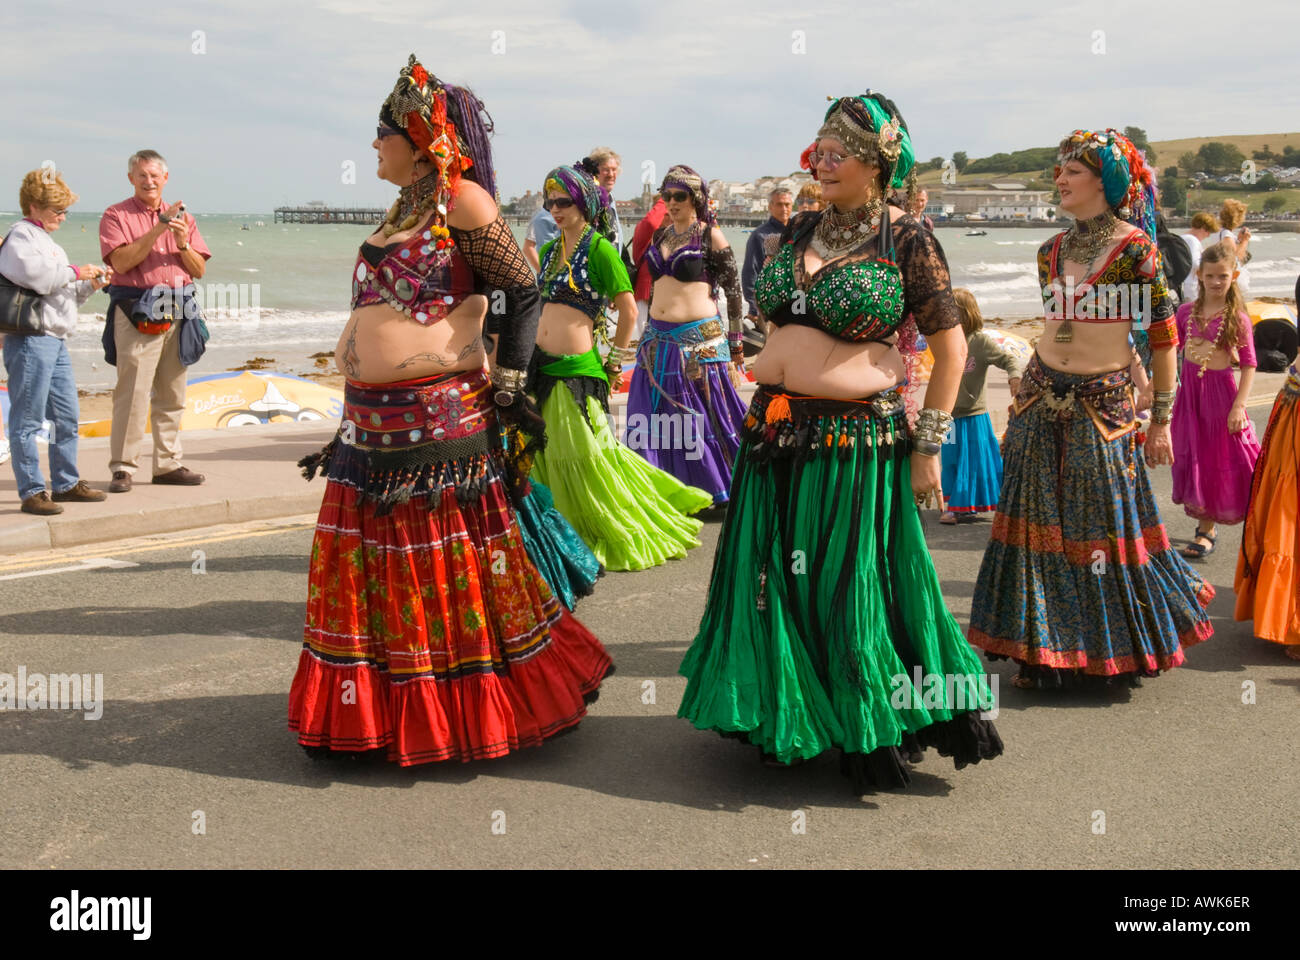 Swanage Folk Festival. eccentric extrovert belly dancers in parade of traditional dancers along sea front. September, Dorset, UK Stock Photo